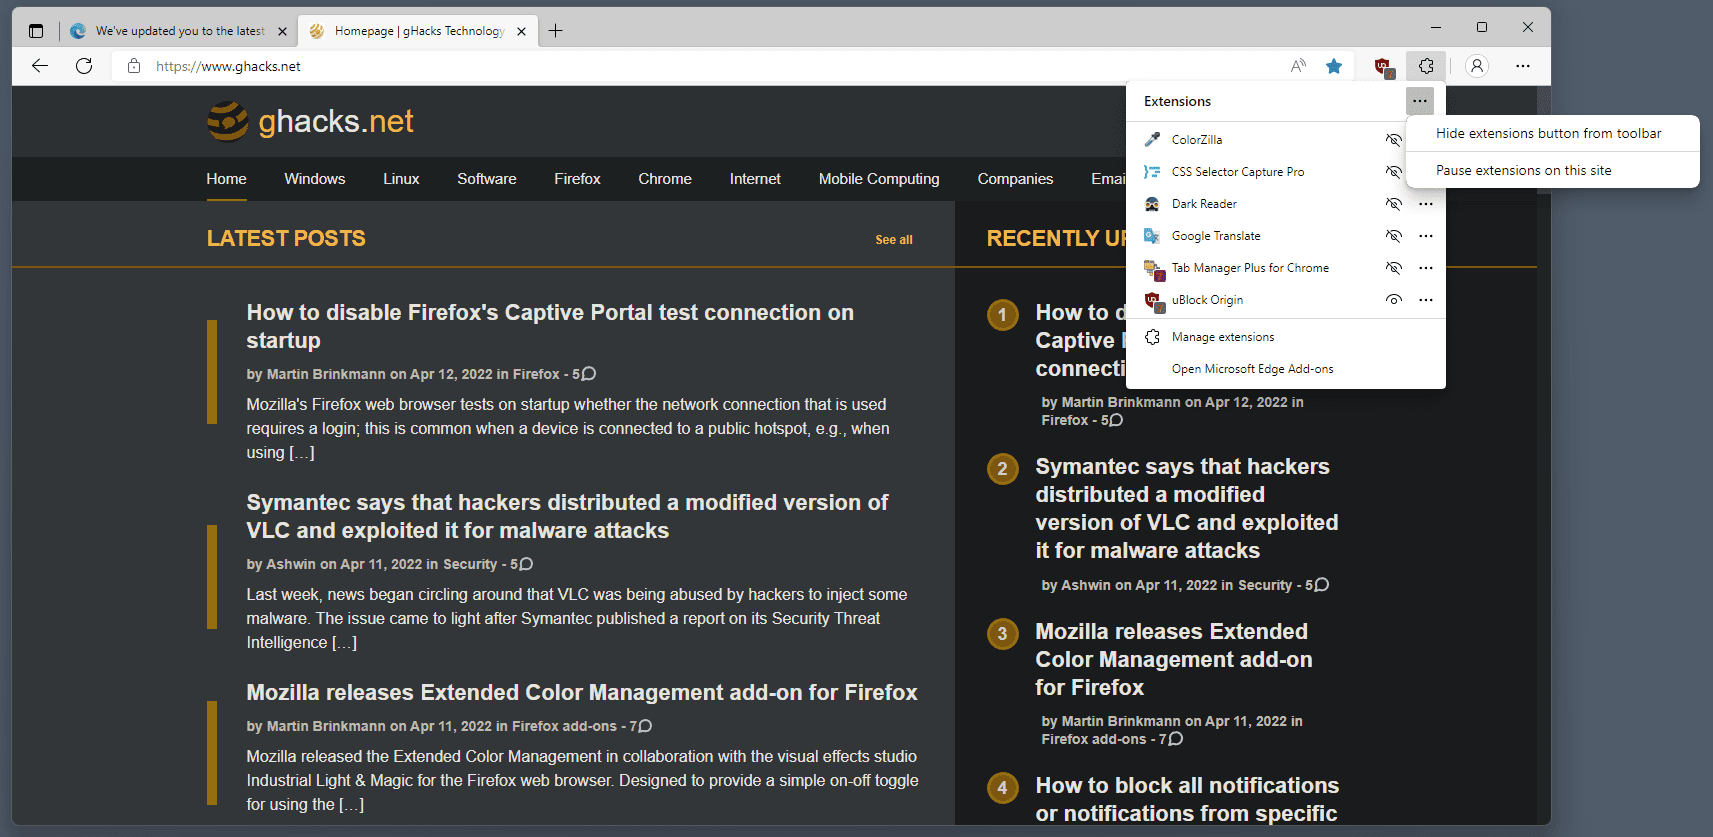 Microsoft Edge is getting an option to pause extensions on sites